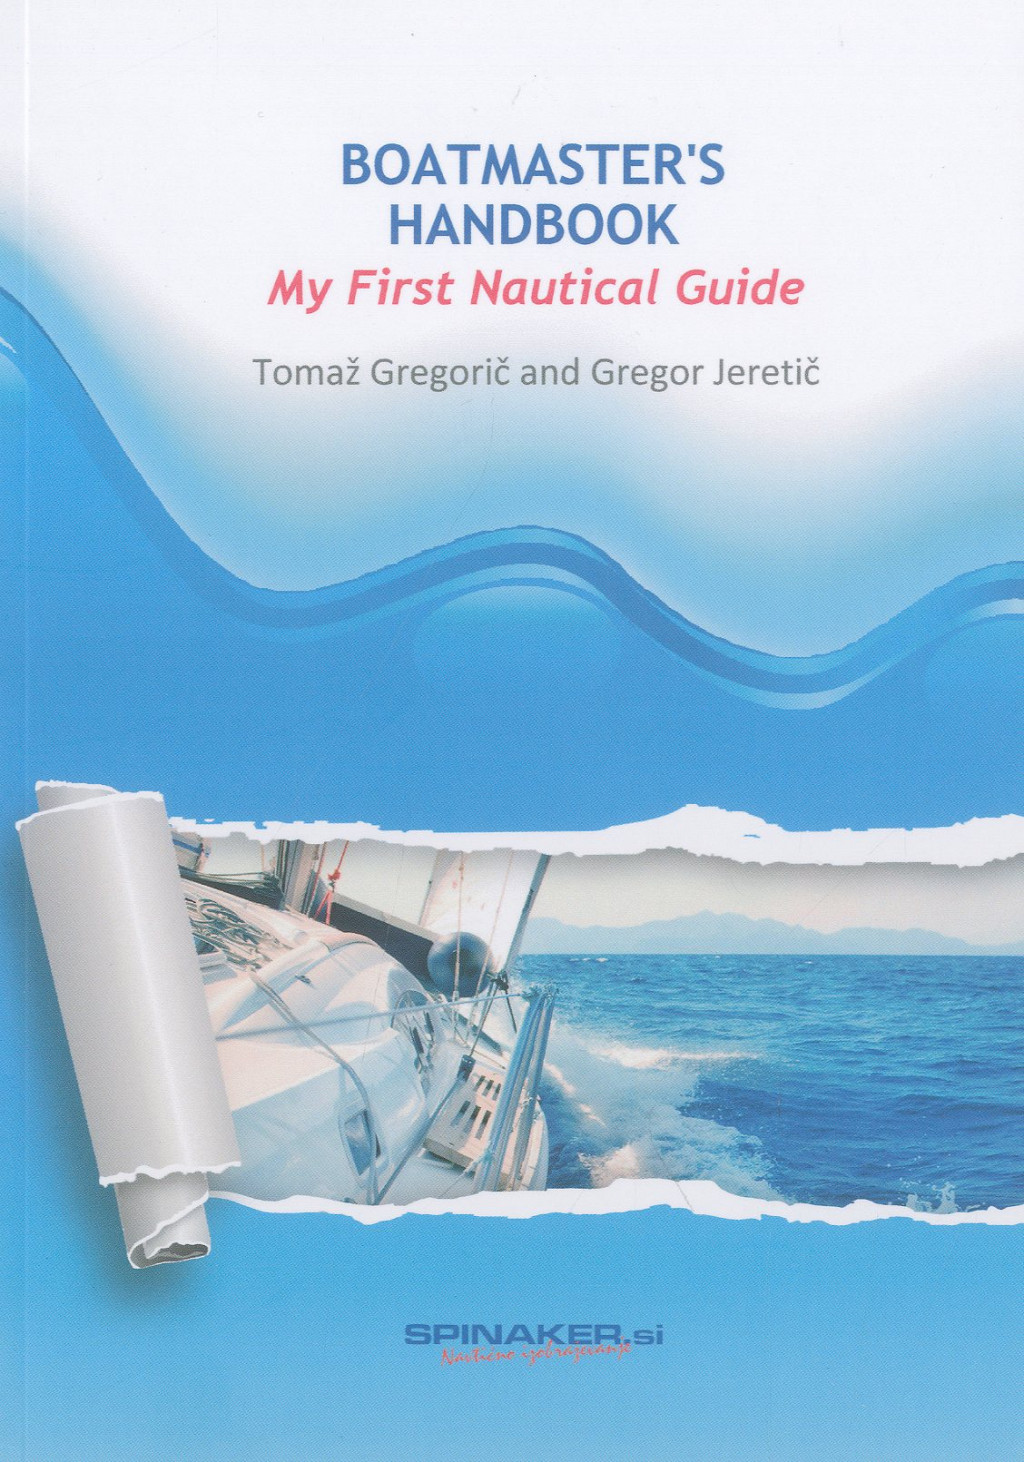 Boatmaster's handbook, My first nautical Guide